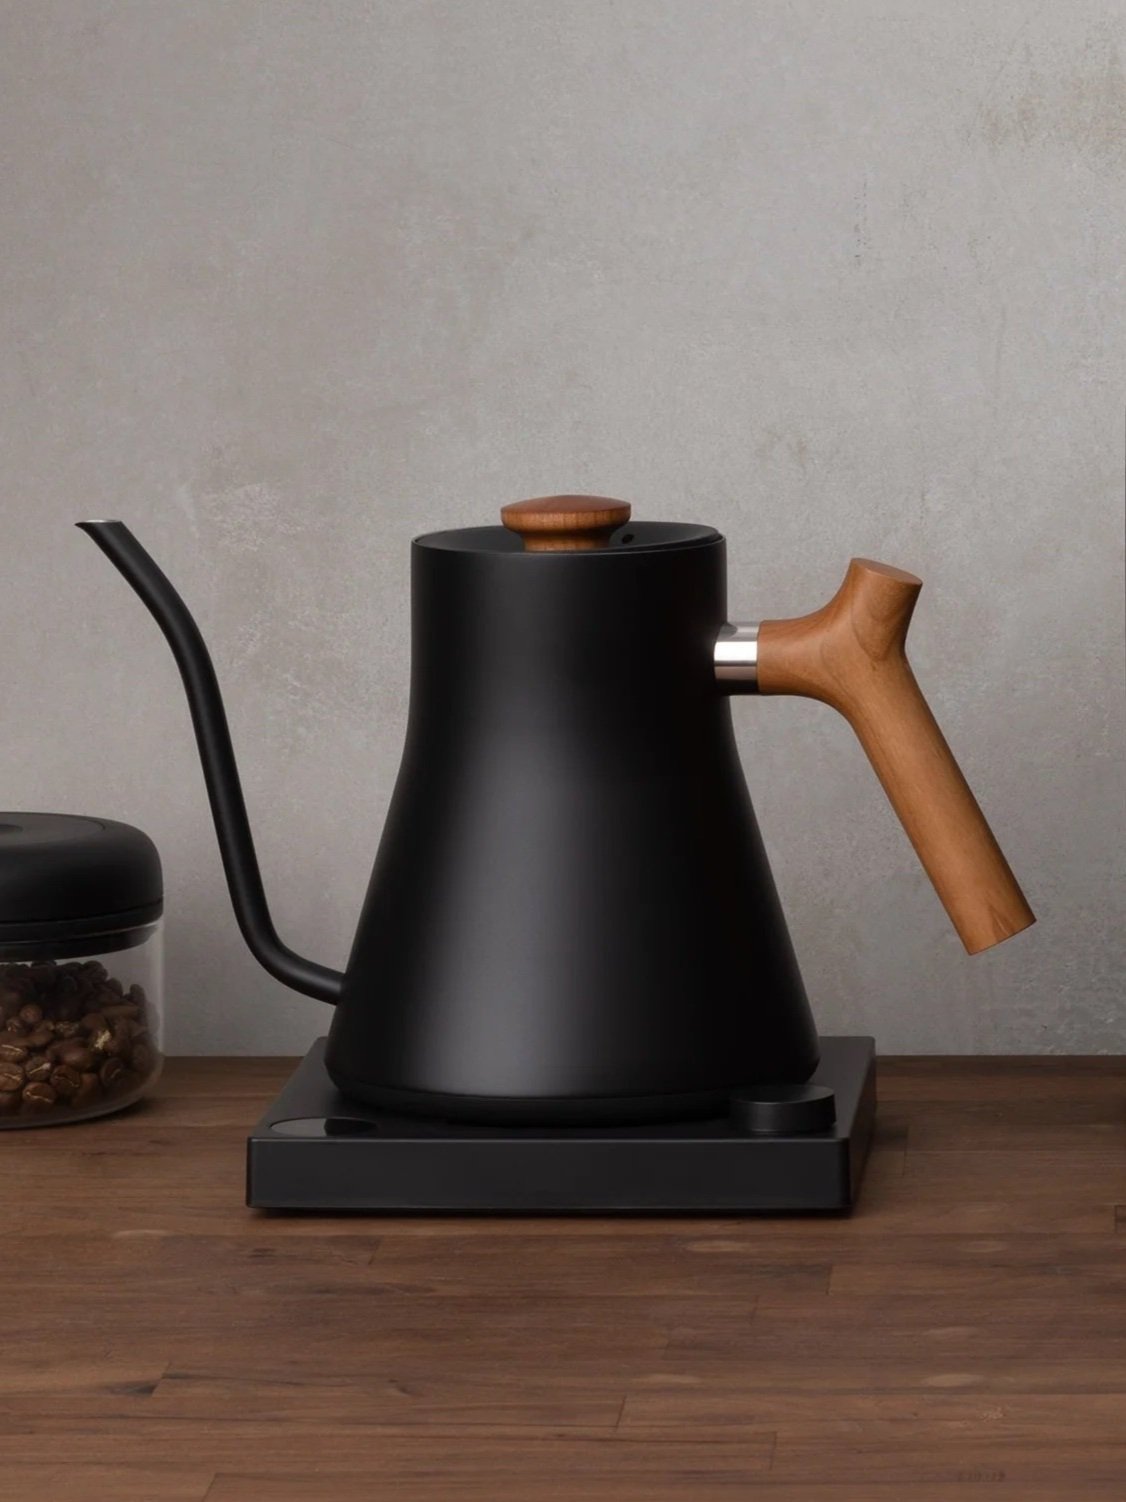 Best Non-Toxic Tea Kettles for a Healthier Brew